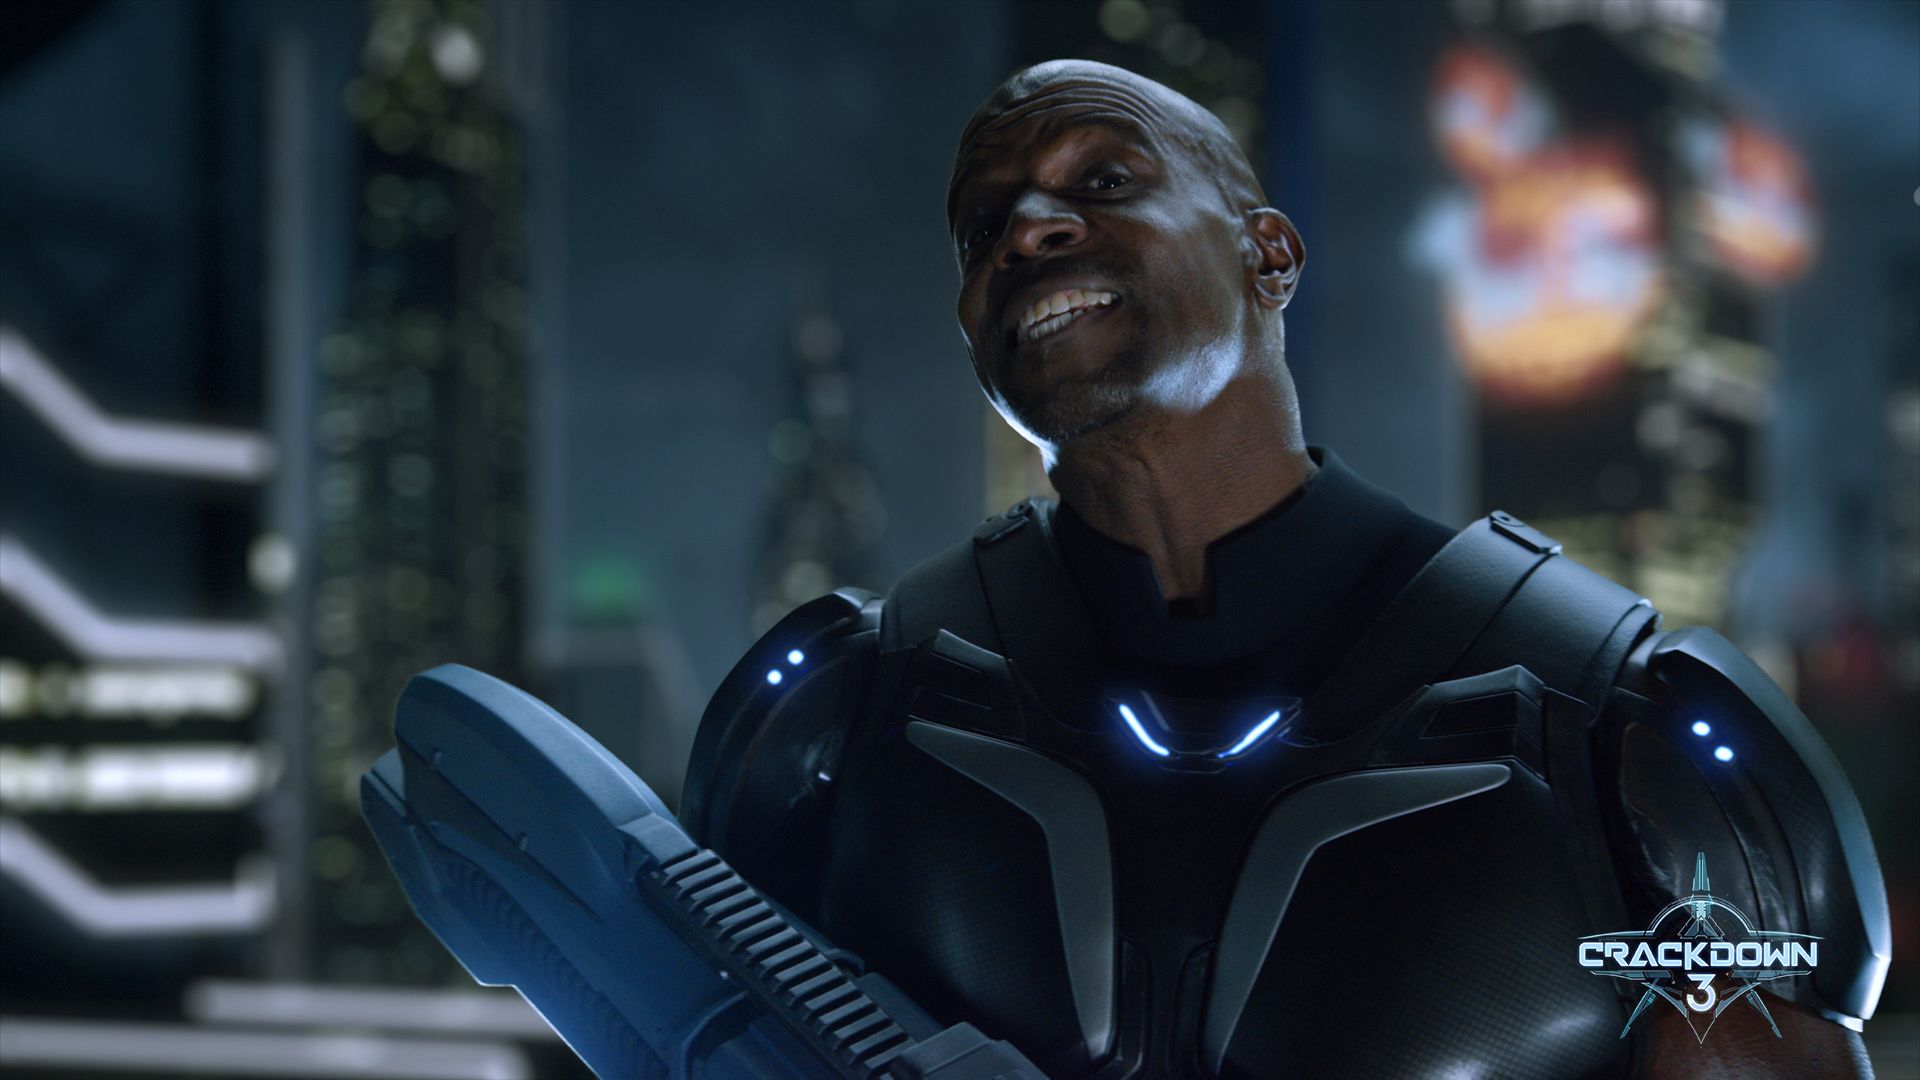 Crackdown 3 System Requirements Listed On The Microsoft Store Pc Gamer